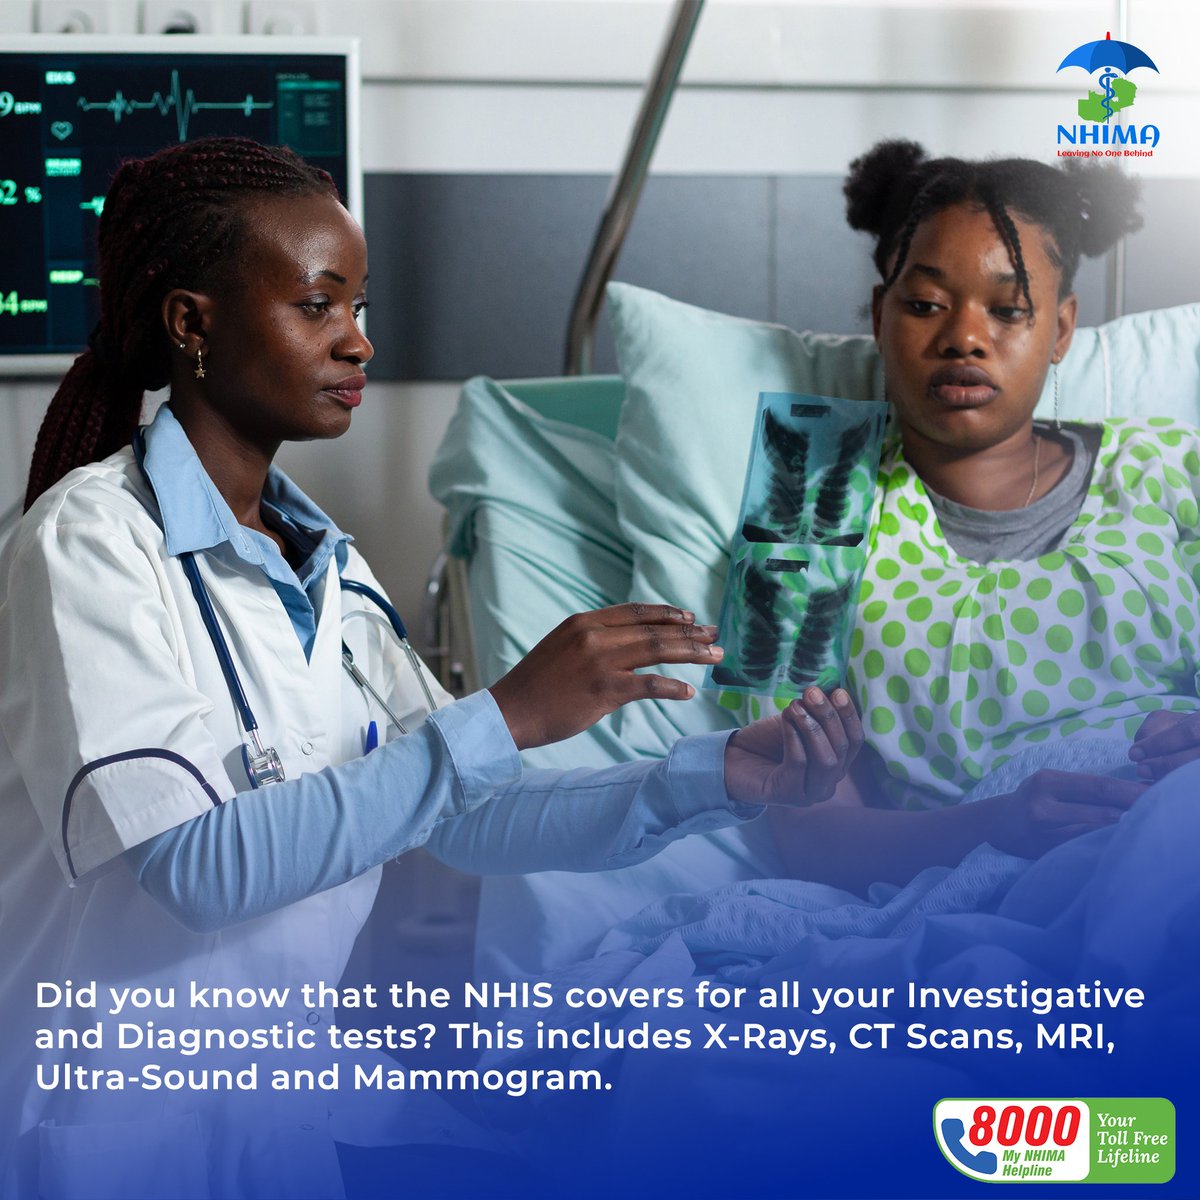 Do you require OPD Registration and Consultation Services? NHIMA provides for the costs of Investigations and Diagnostic tests as per the Investigation List in the benefits Package. This includes radiological investigation such as X-Ray, CT scan, MRI, Ultra sound and Mammogram.